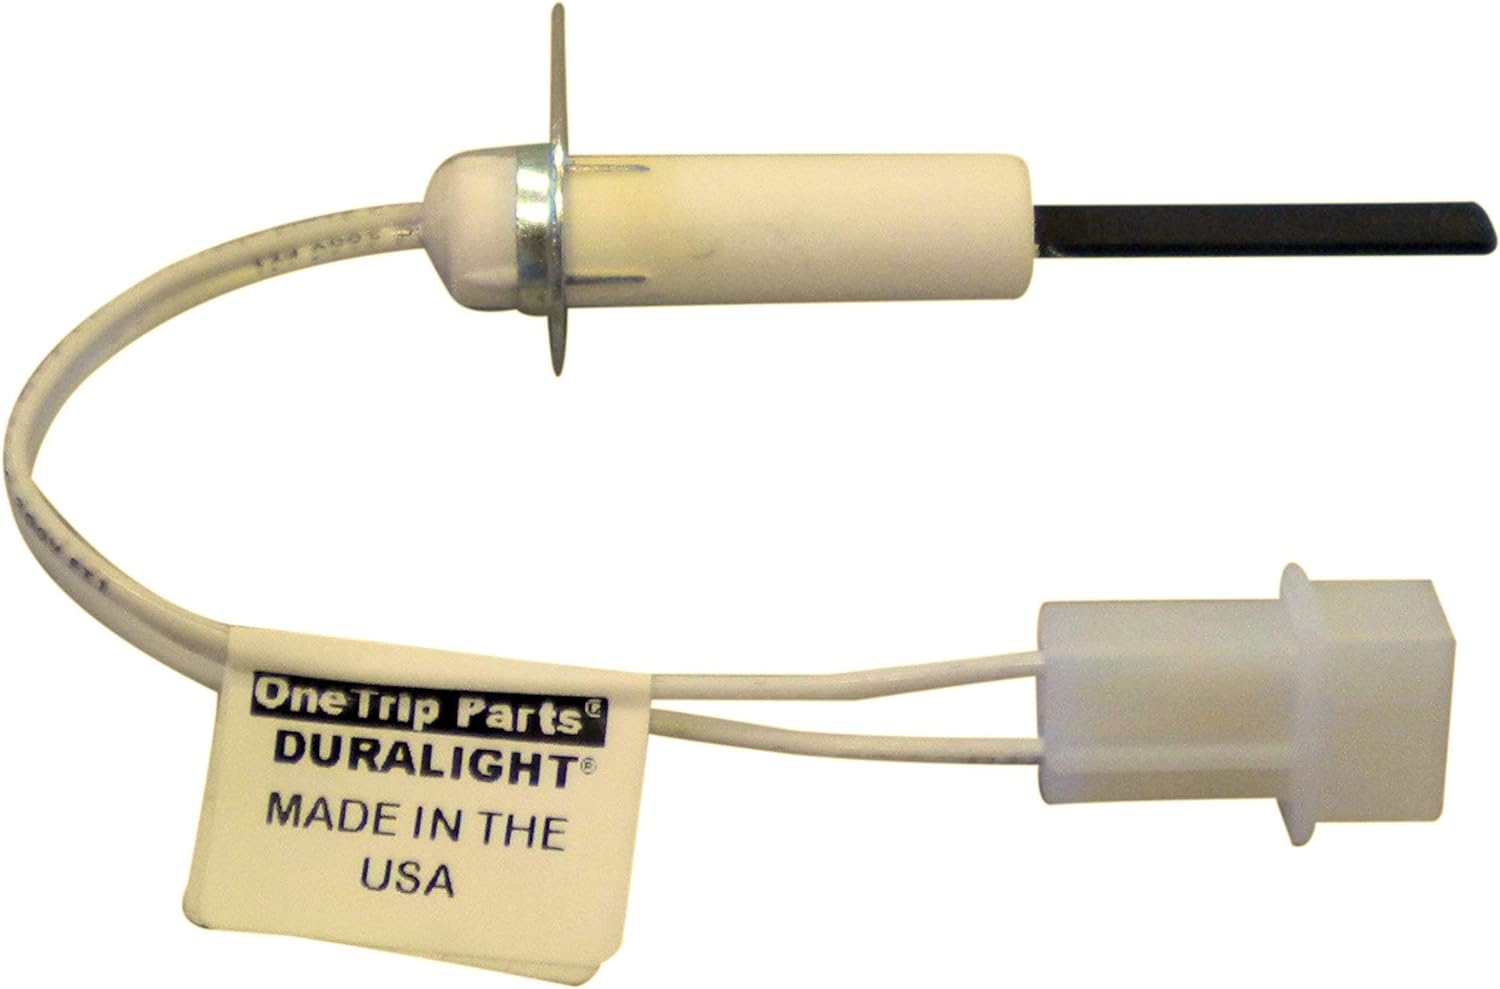 OneTrip Parts Duralight USA Nitride Furnace - Heater Ignitor Direct Replacement For Goodman Amana Janitrol OEM Part 20165703S